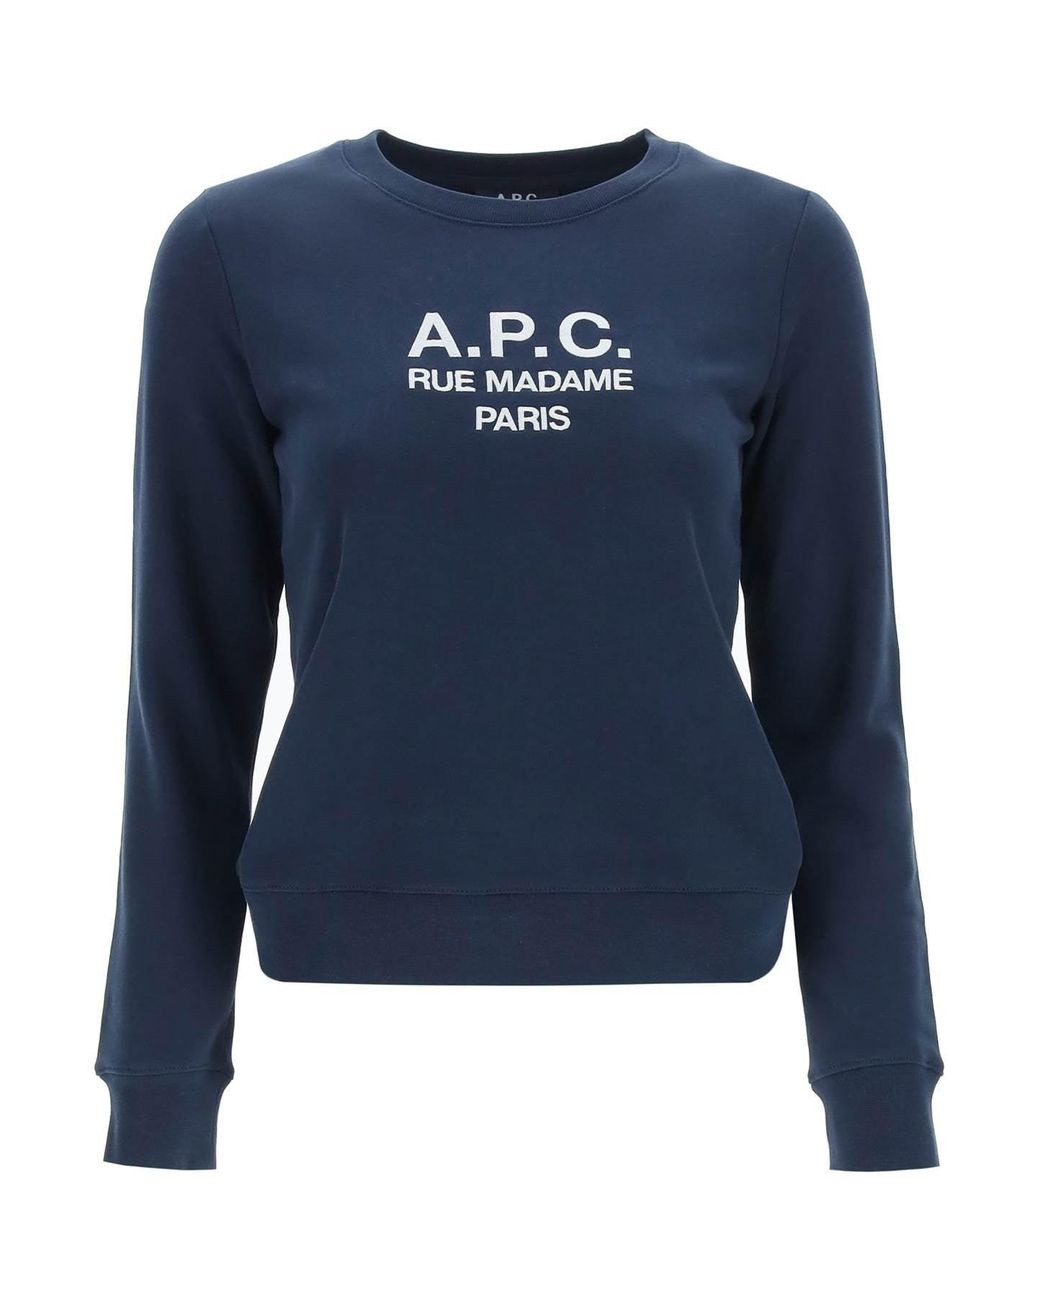 A.P.C. Tina Sweatshirt With Embroidered Logo in Blue | Lyst